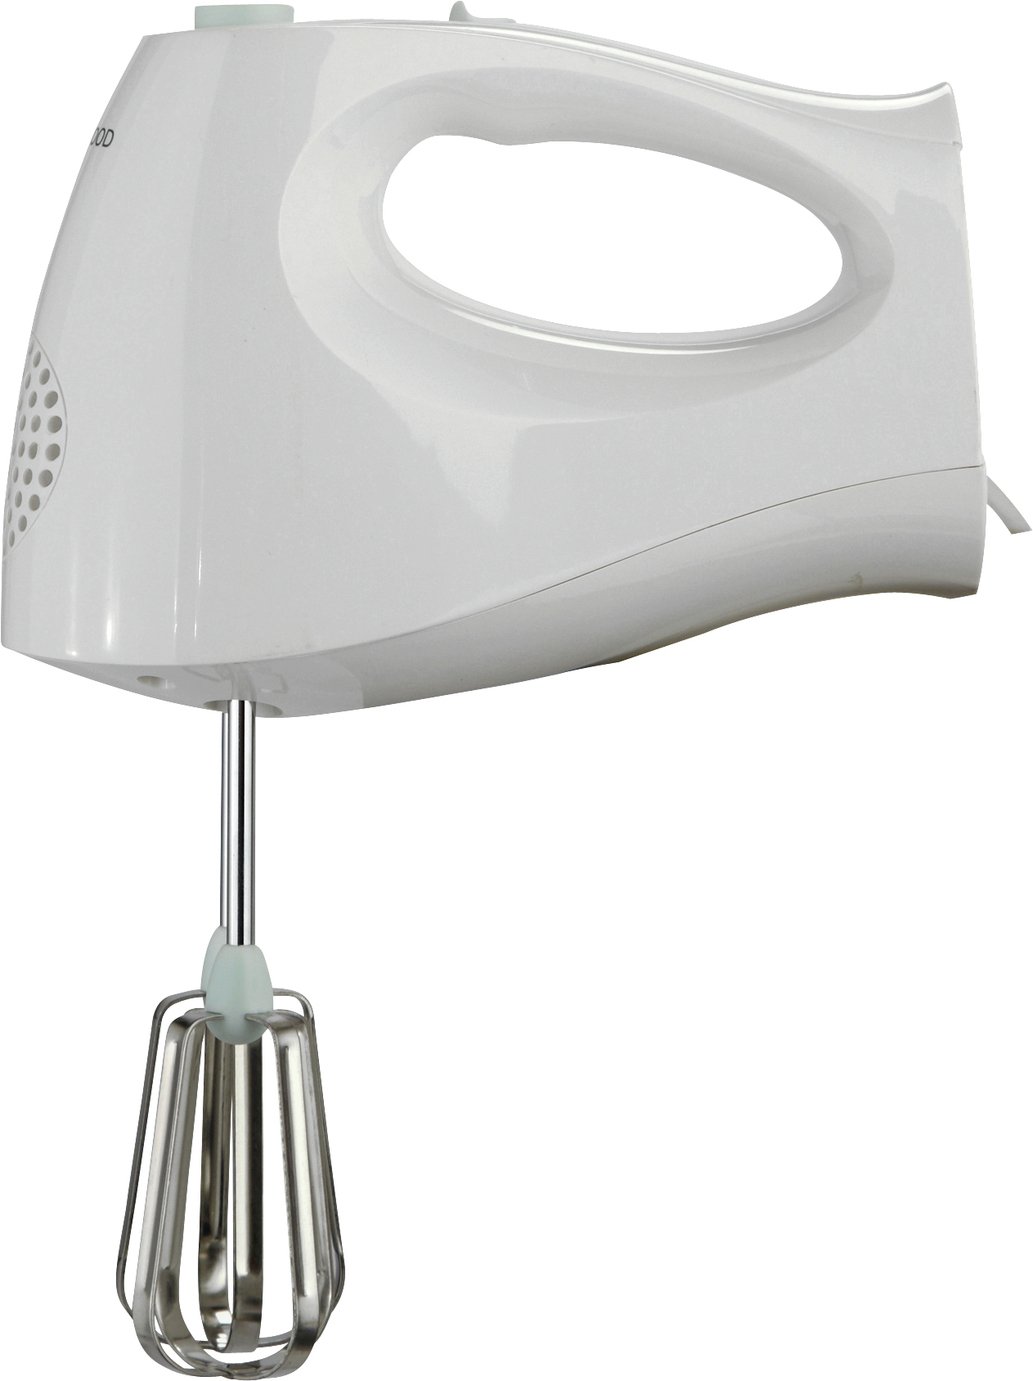 Kenwood HM220 Electric Hand Mixer Review